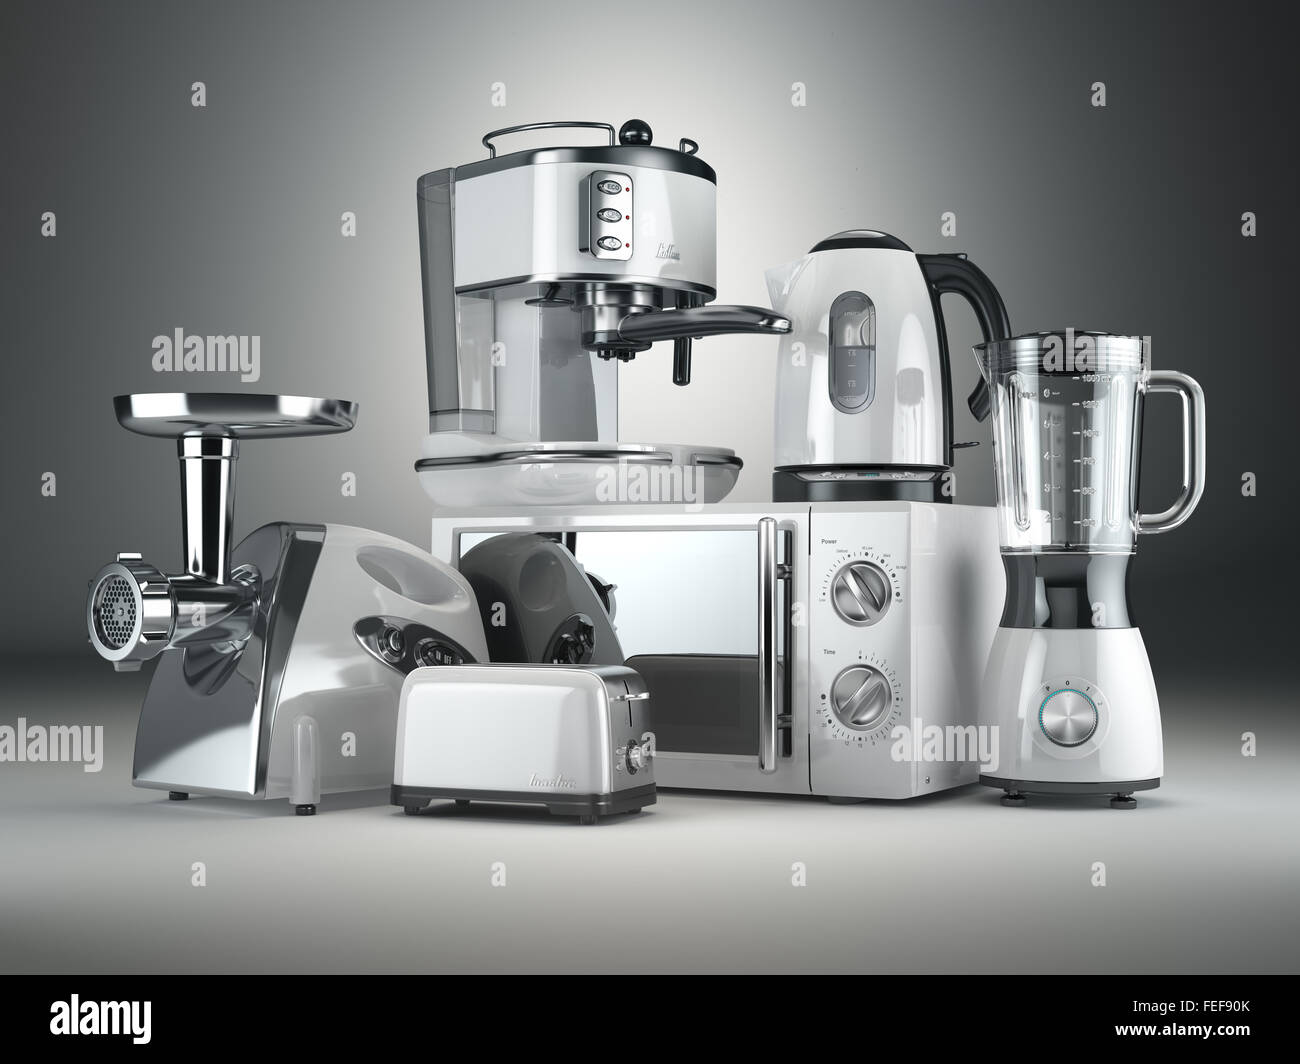 Red Background Monochrome 3d Icon Of A Coffee Maker With Microwave  Functionality, Household Appliances, Home Appliances, Appliances Background  Image And Wallpaper for Free Download